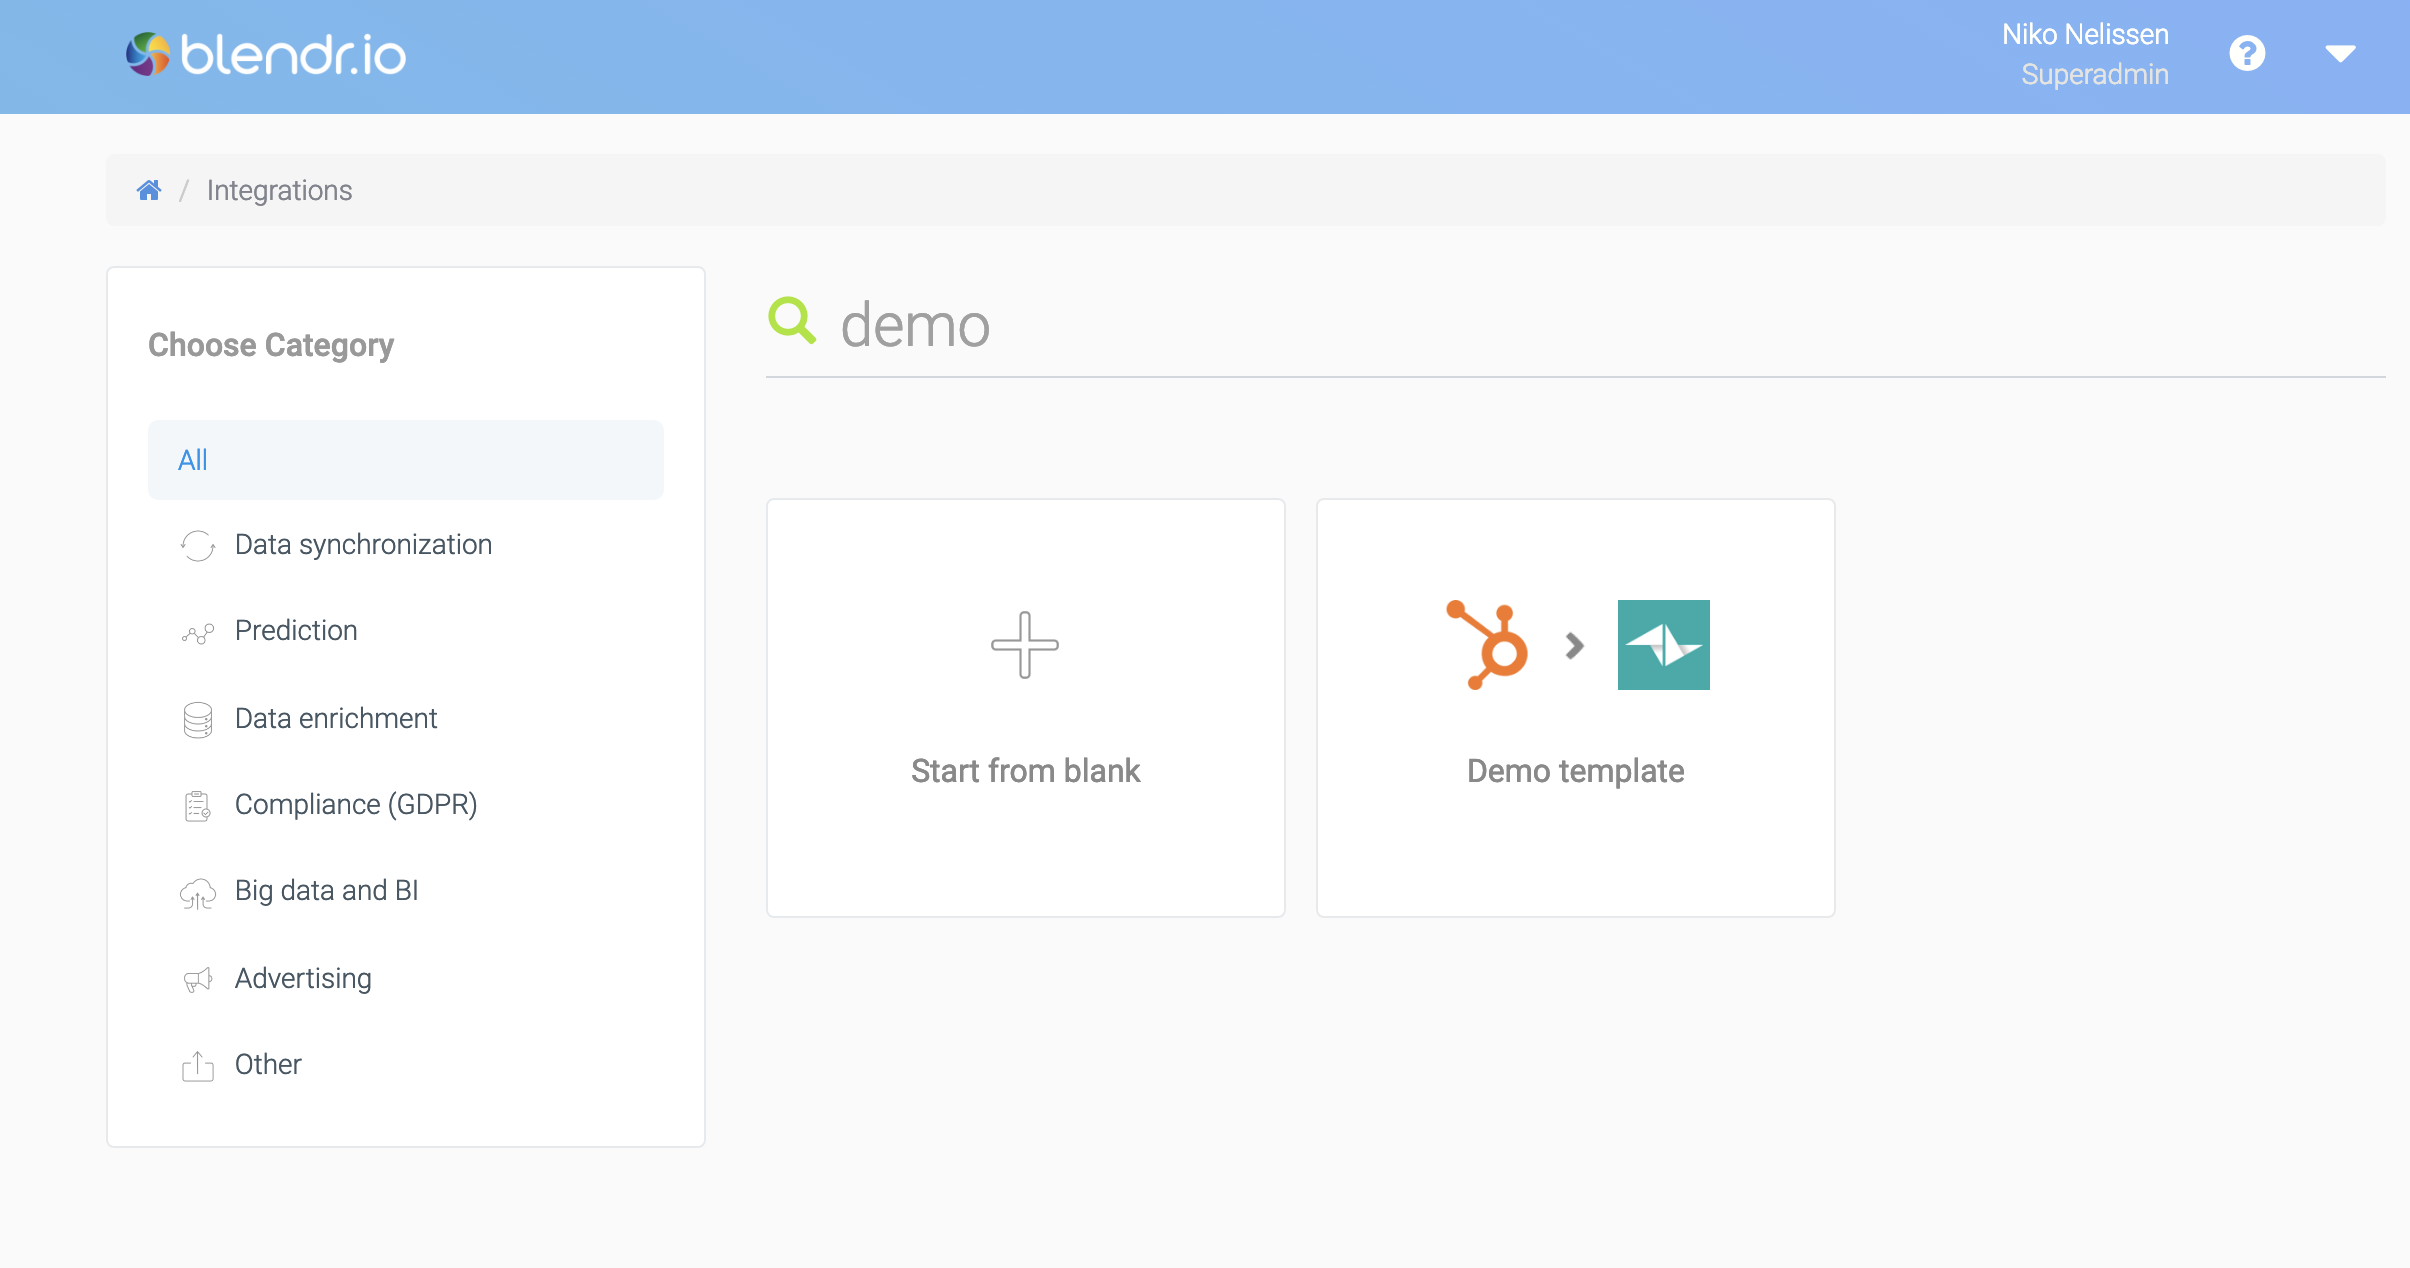 The Demo template now appears in the integrations list.